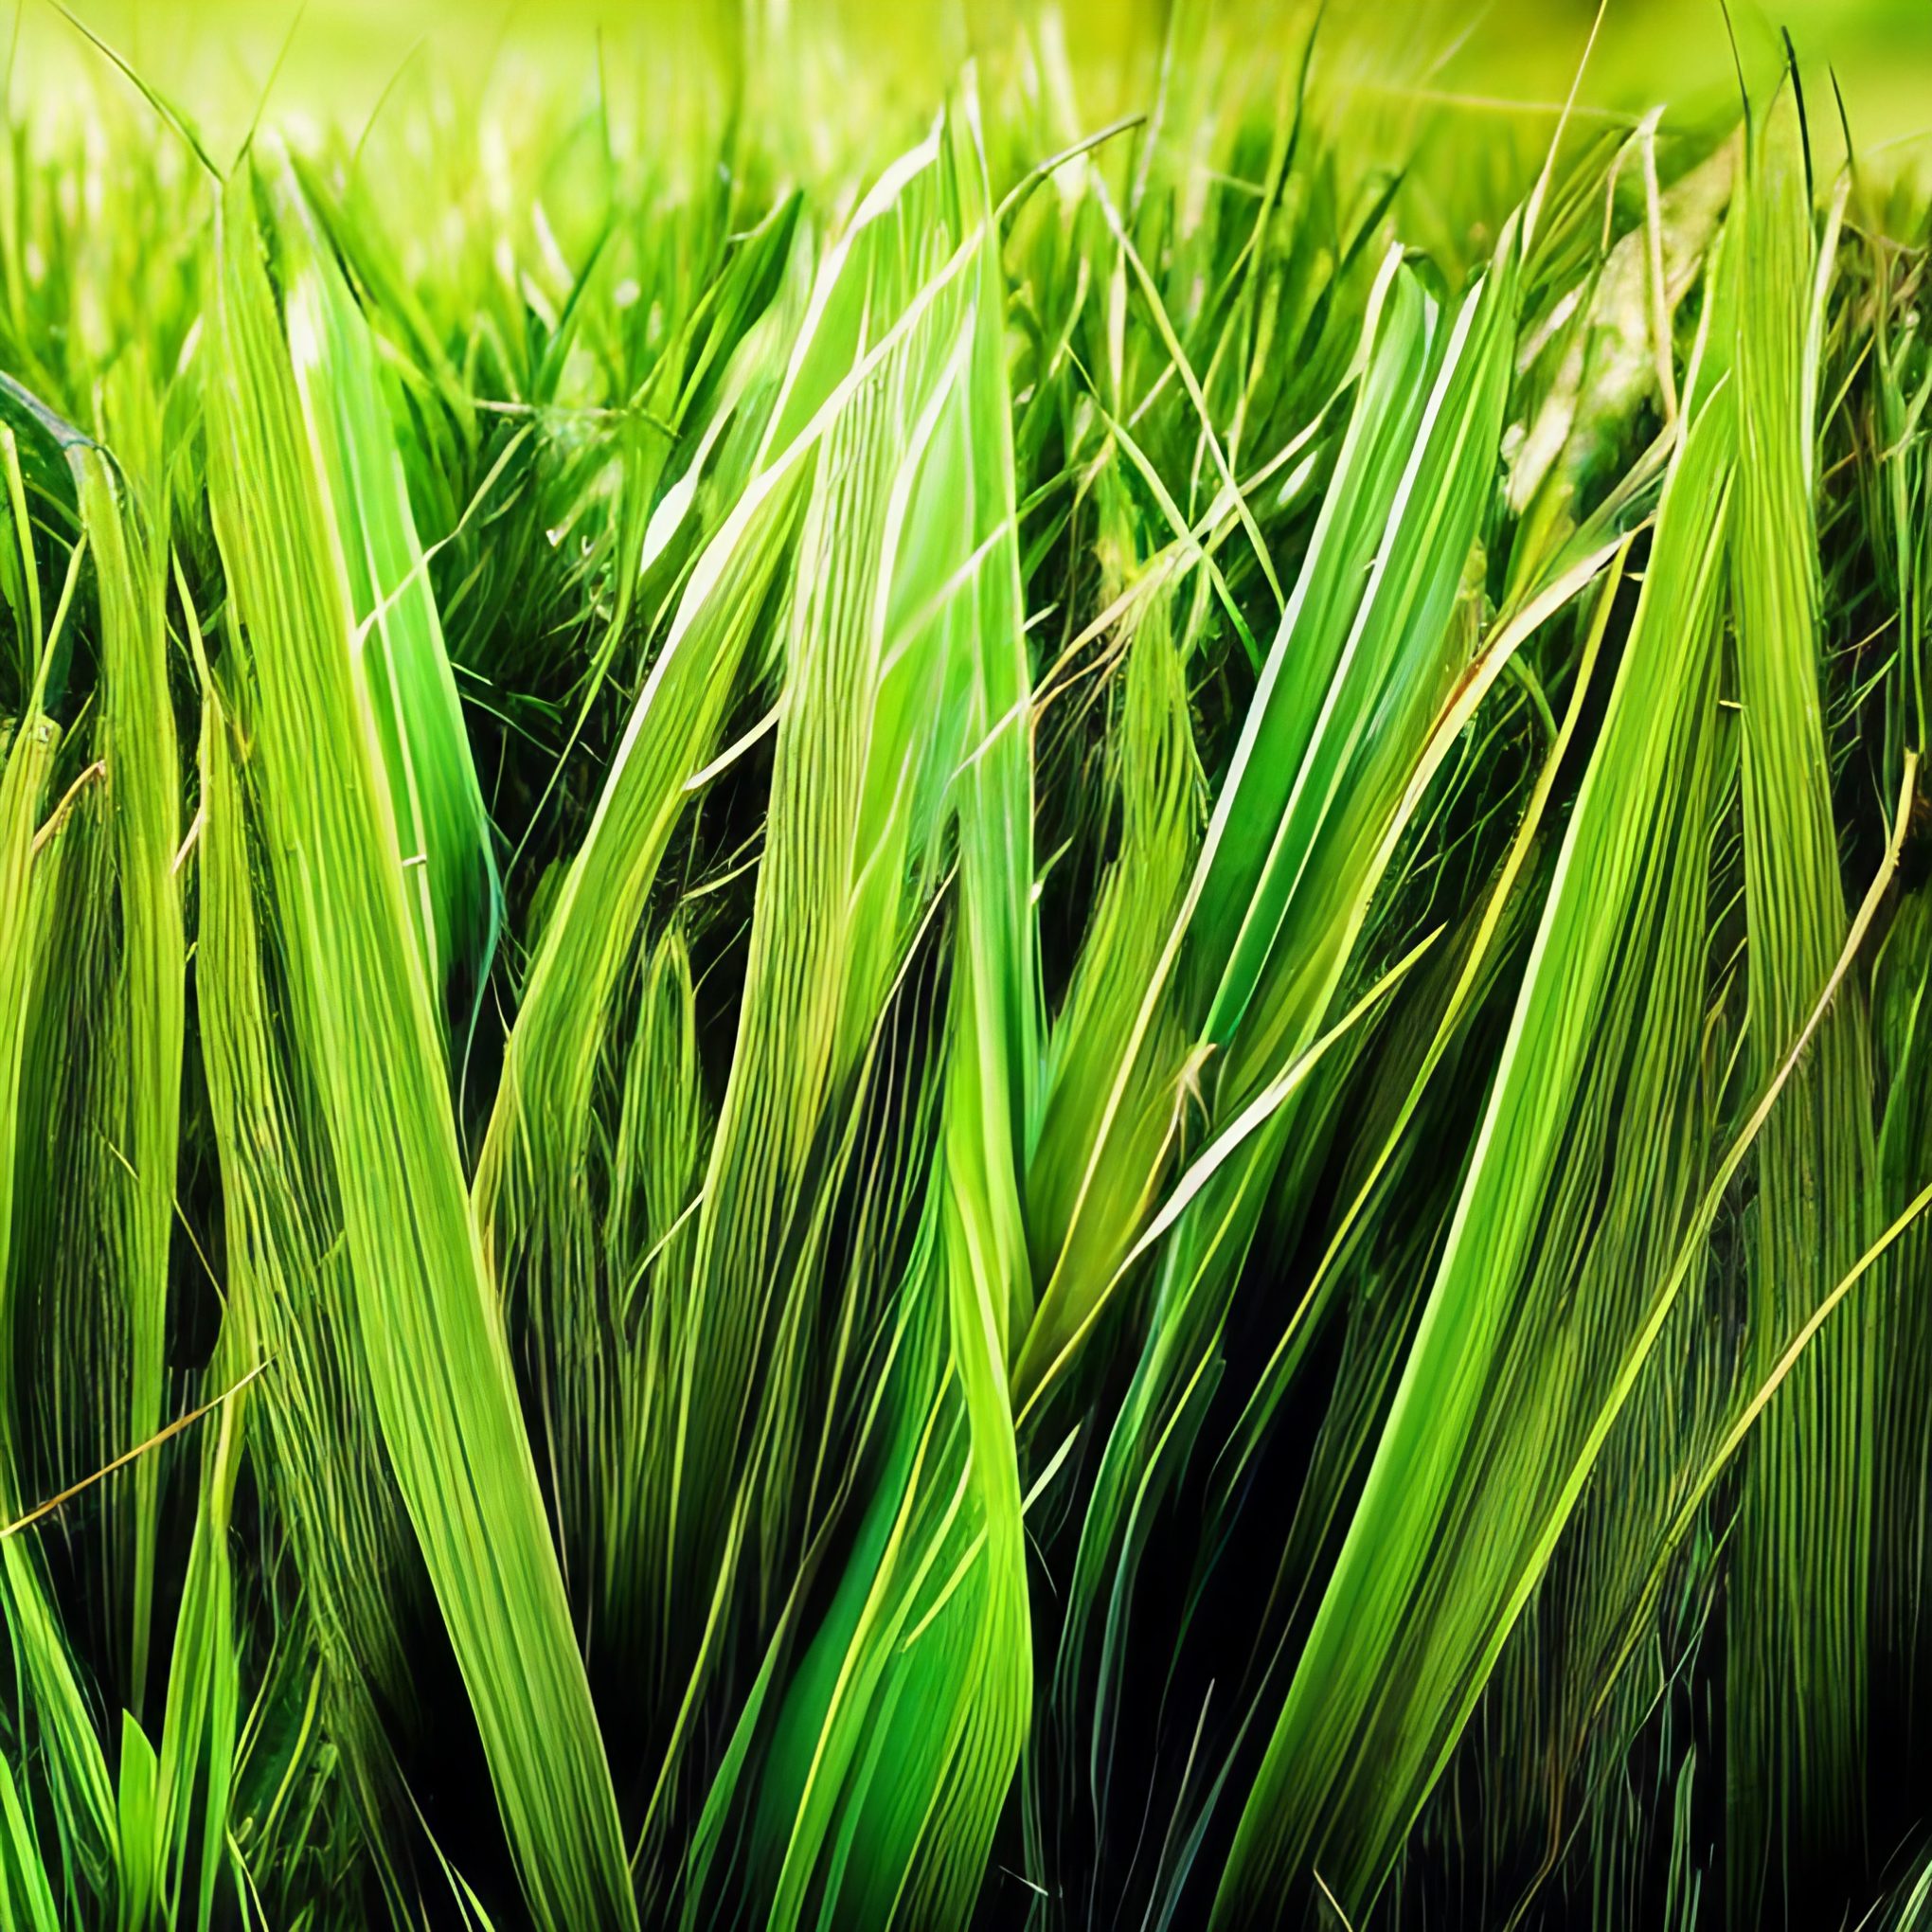 Free Stock Image Green Blades of Grass Close up